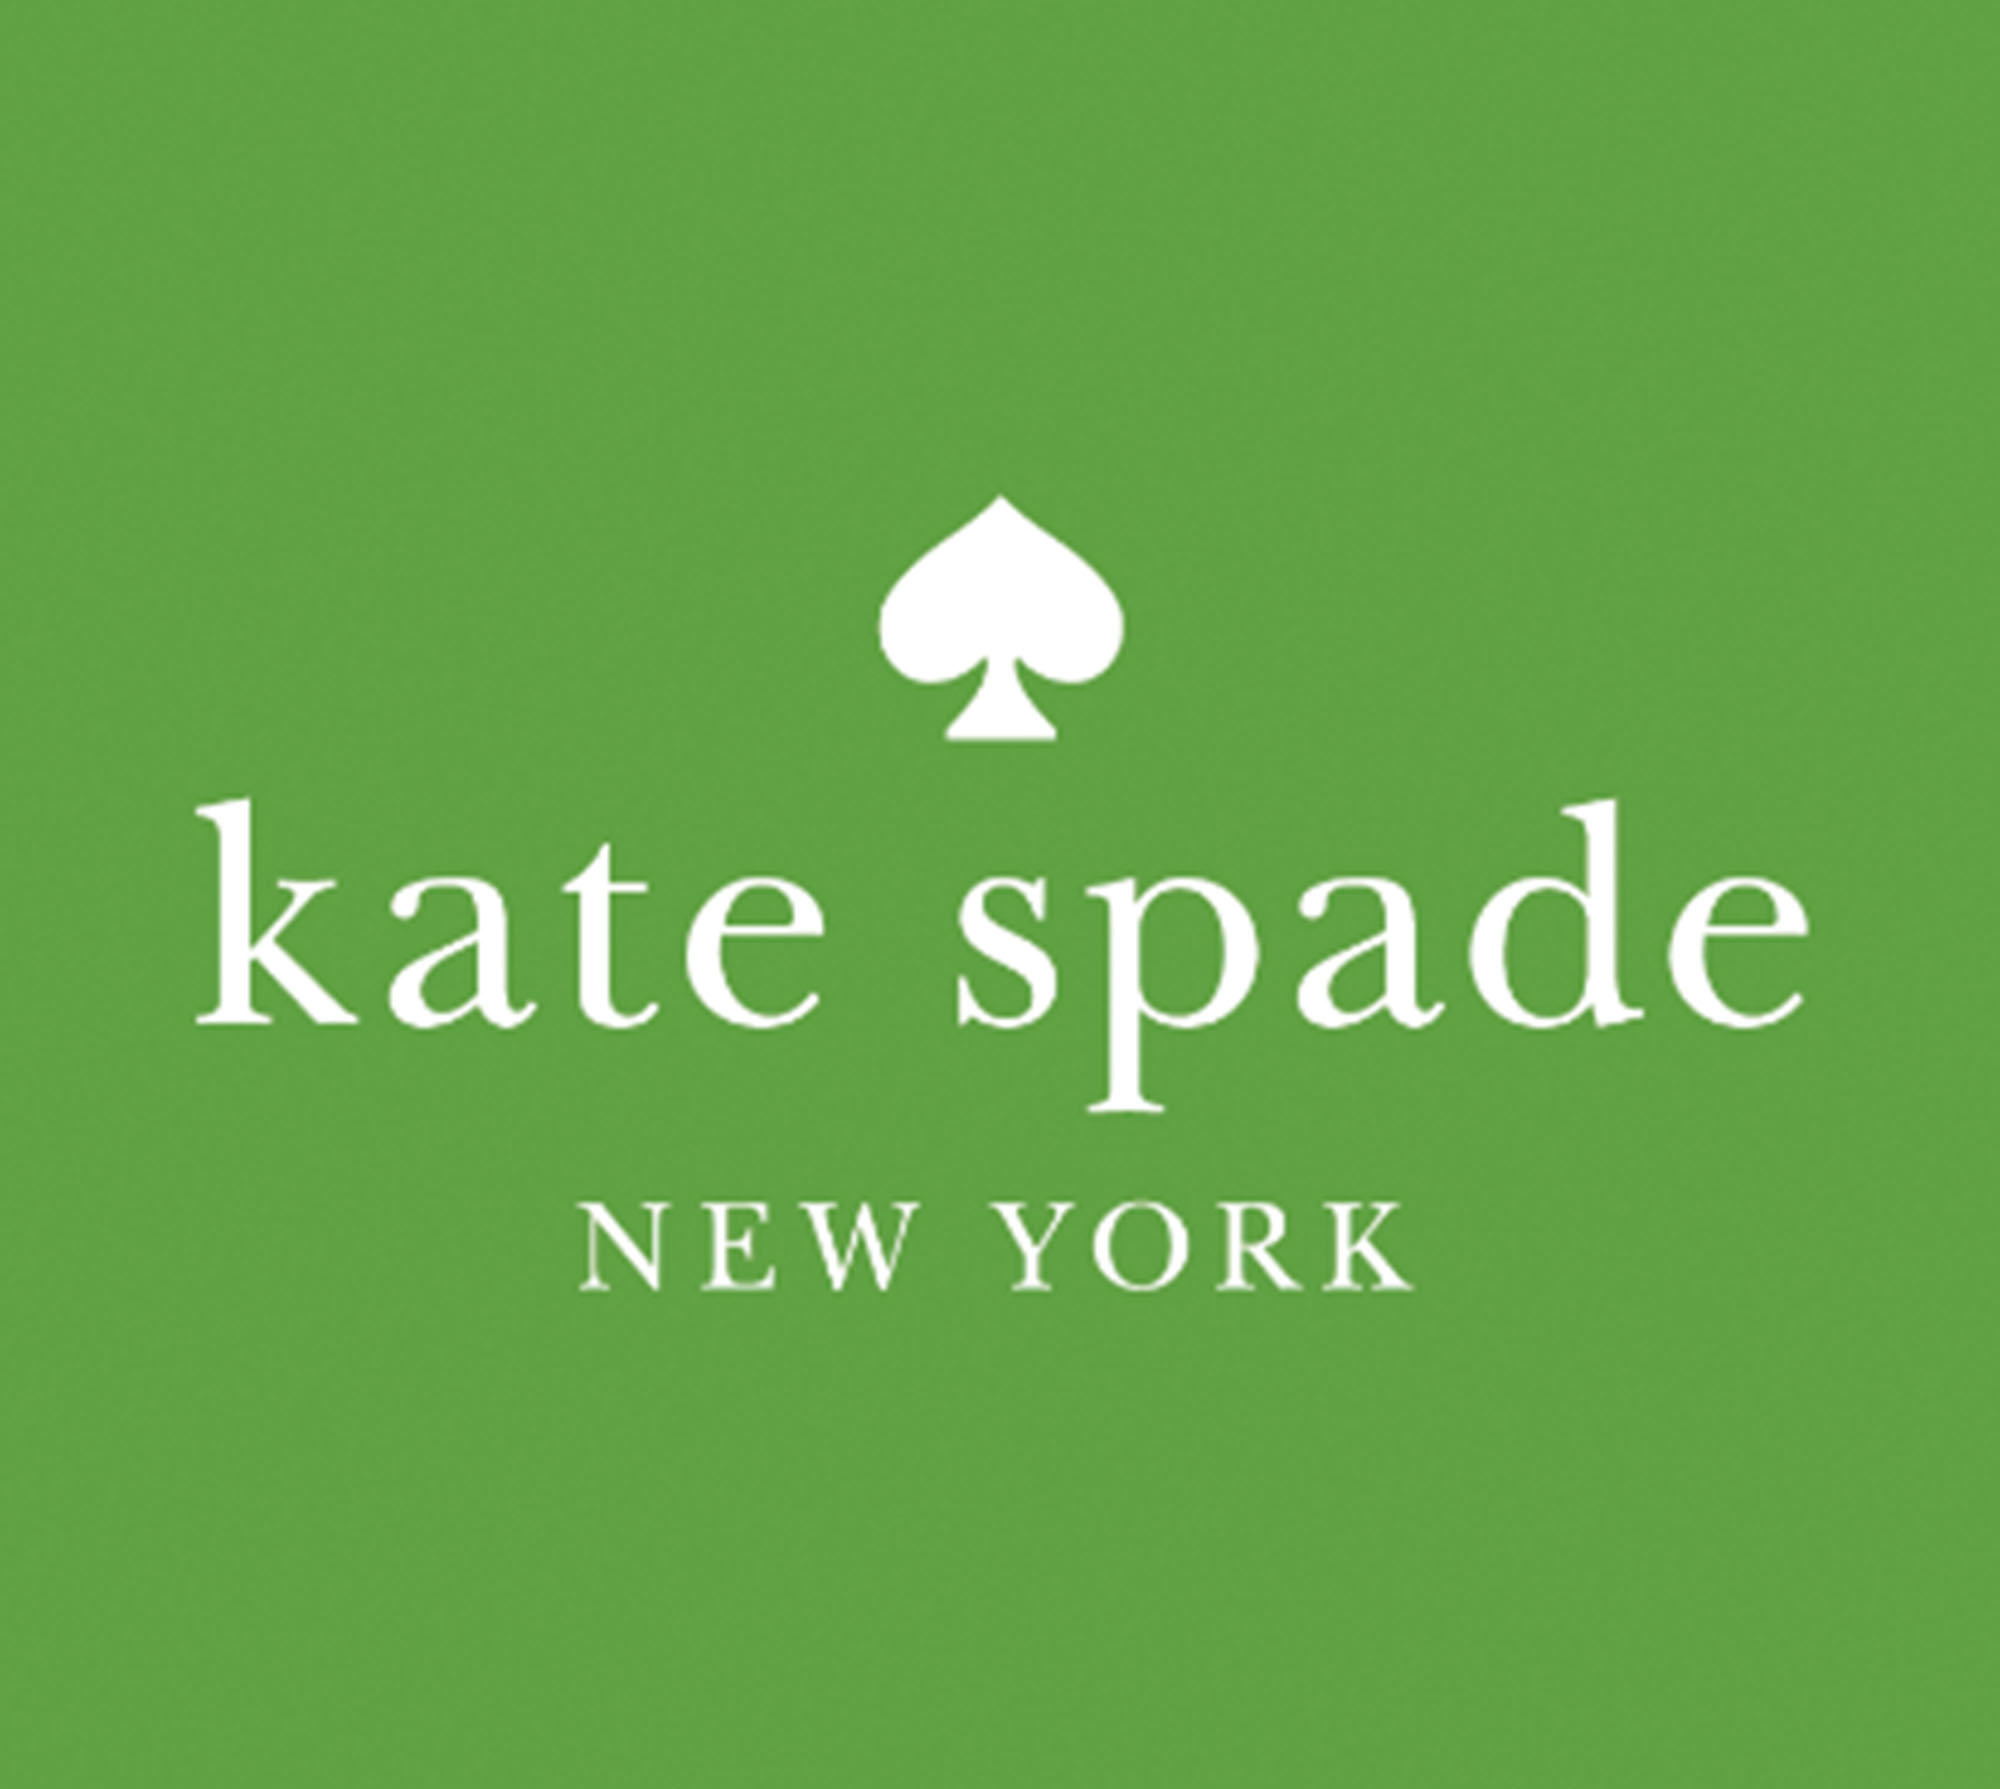 Kate Spade's New Look | Articles | LogoLounge